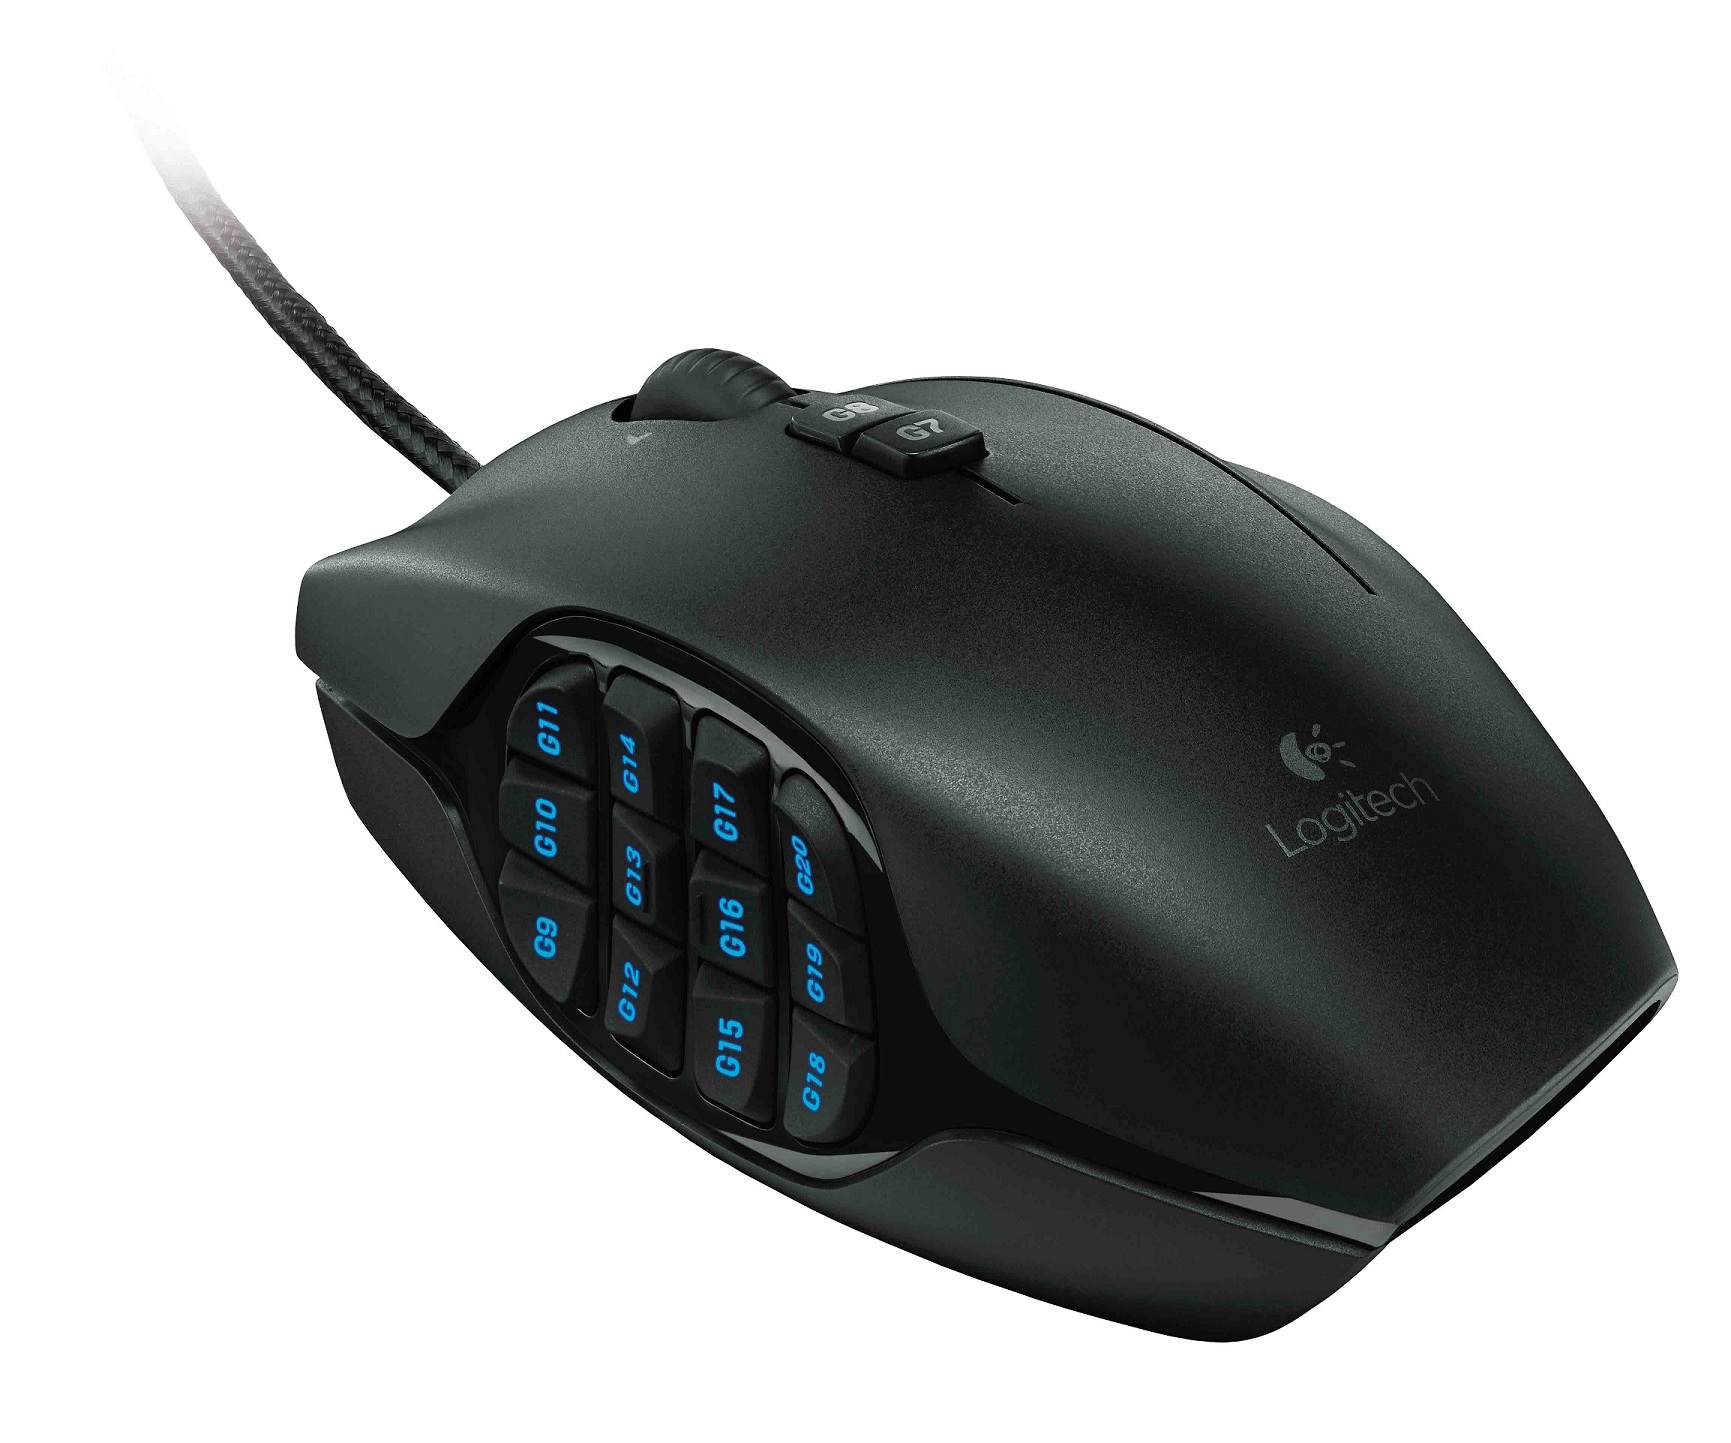 Logitech G600 MMO Gaming Mouse Review | Custom PC Review